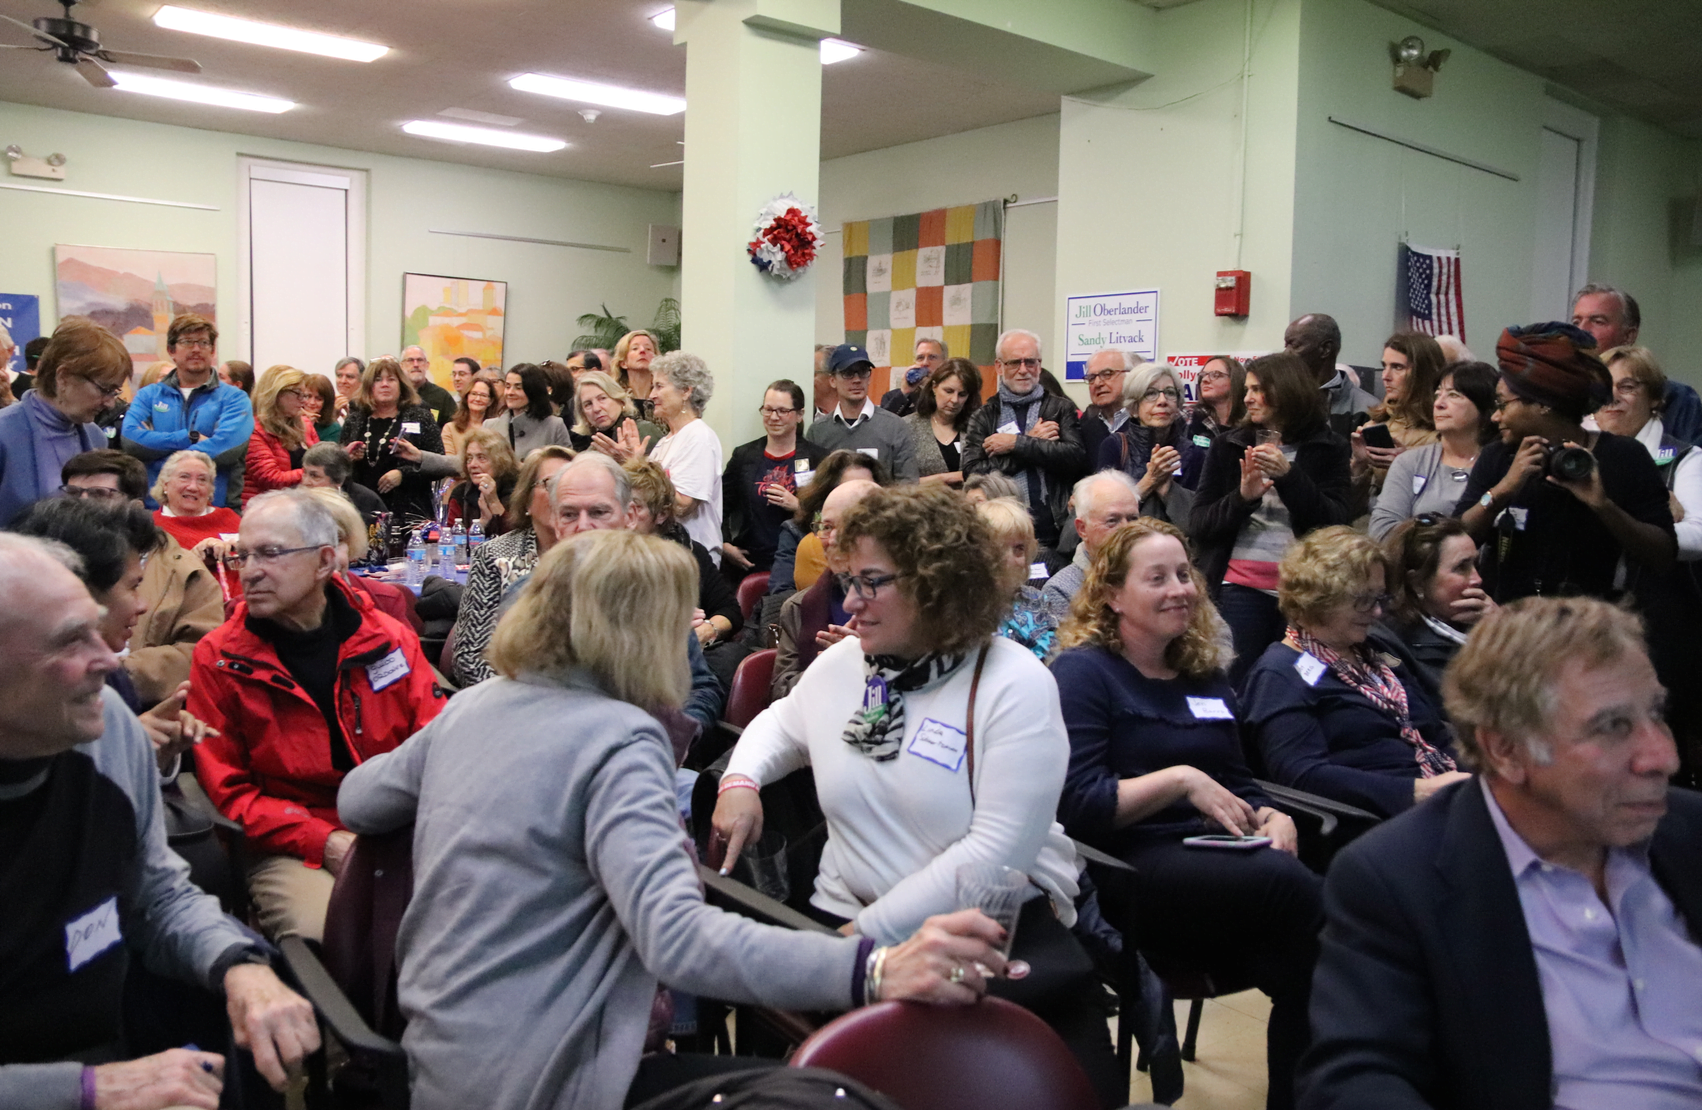 The crowd at the Senior Center was disappointed as First Selectman candidate Jill Oberlander conceded her loss to Republican Fred Camillo. Nov 5, 2019 Photo: Leslie Yager